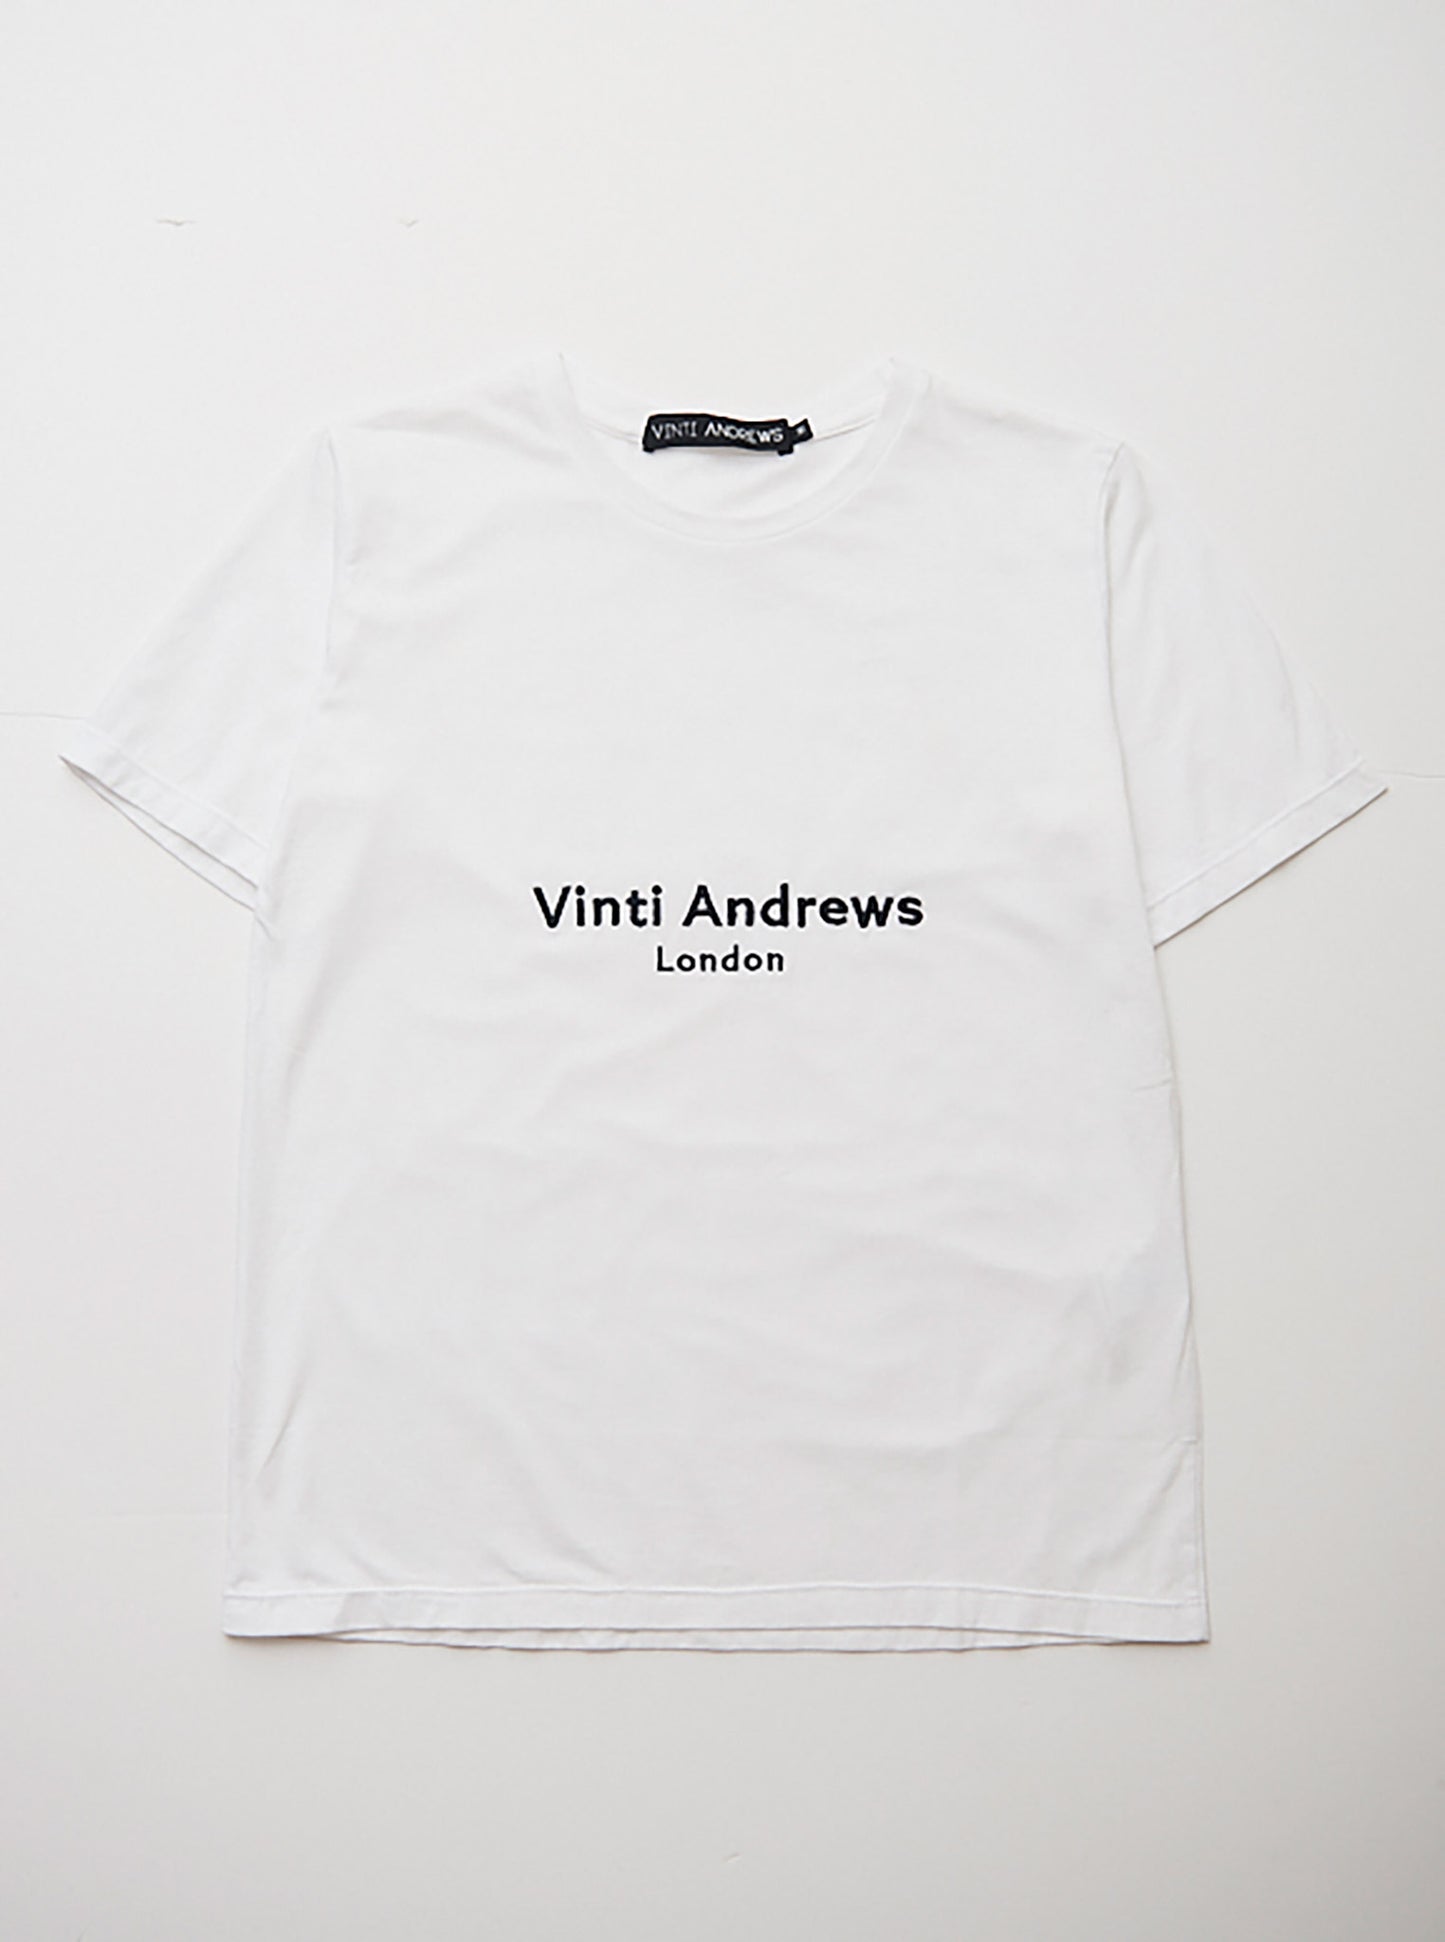 Vinti Andrews Embroidered "Vinti Andrews" T-Shirt